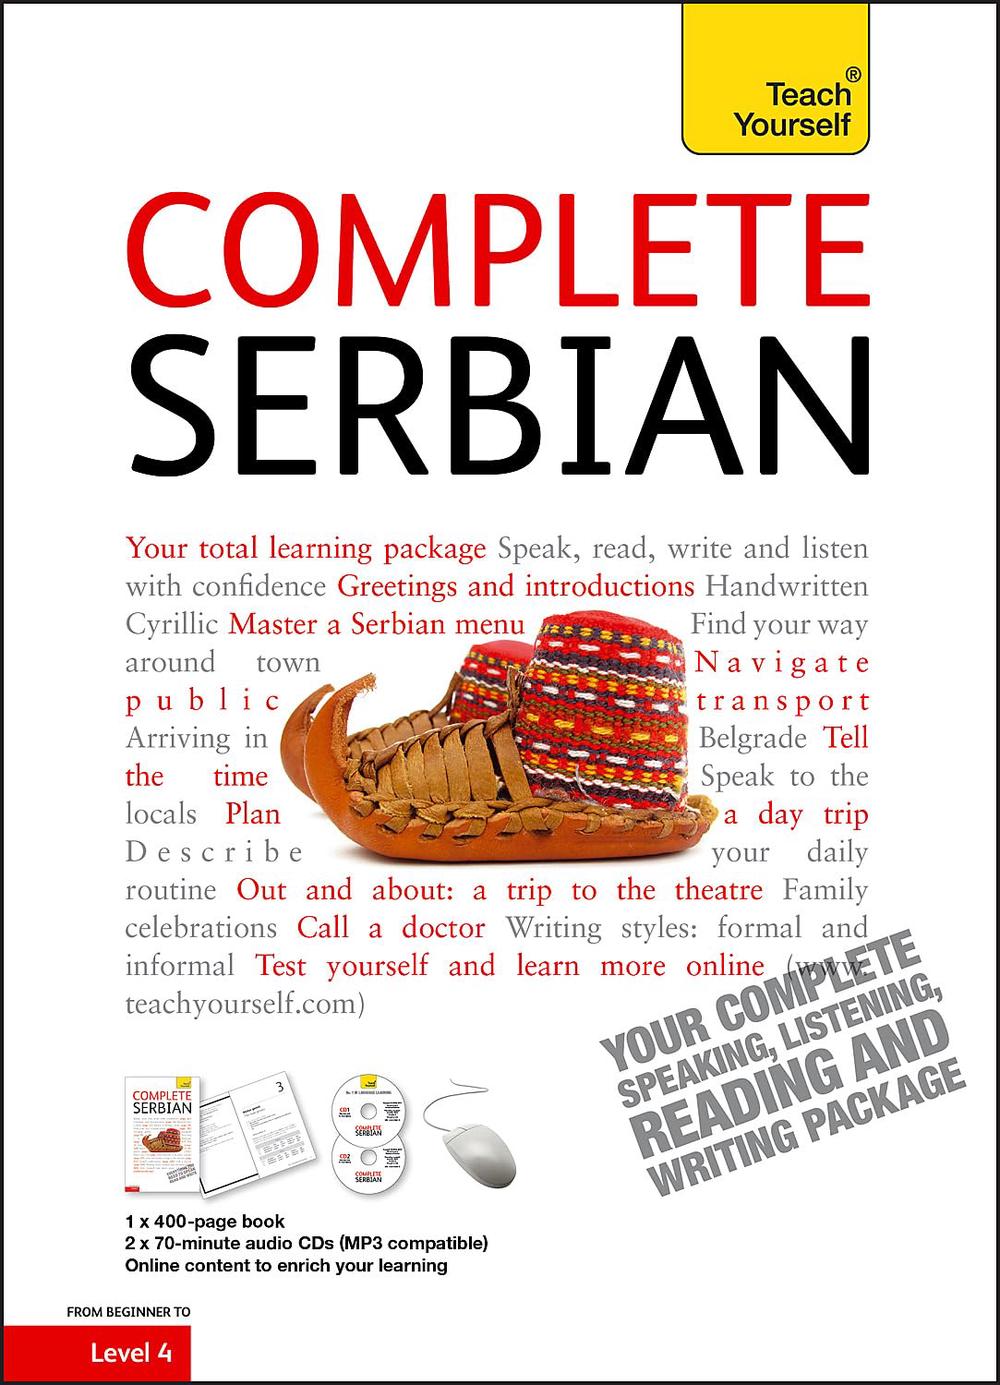 Vladislava　Merchandise,　Ribnikar,　Audio　The　9781444102314　and　to　at　Book　Complete　Beginner　online　Nile　Book　Serbian　by　Course　Intermediate　Buy